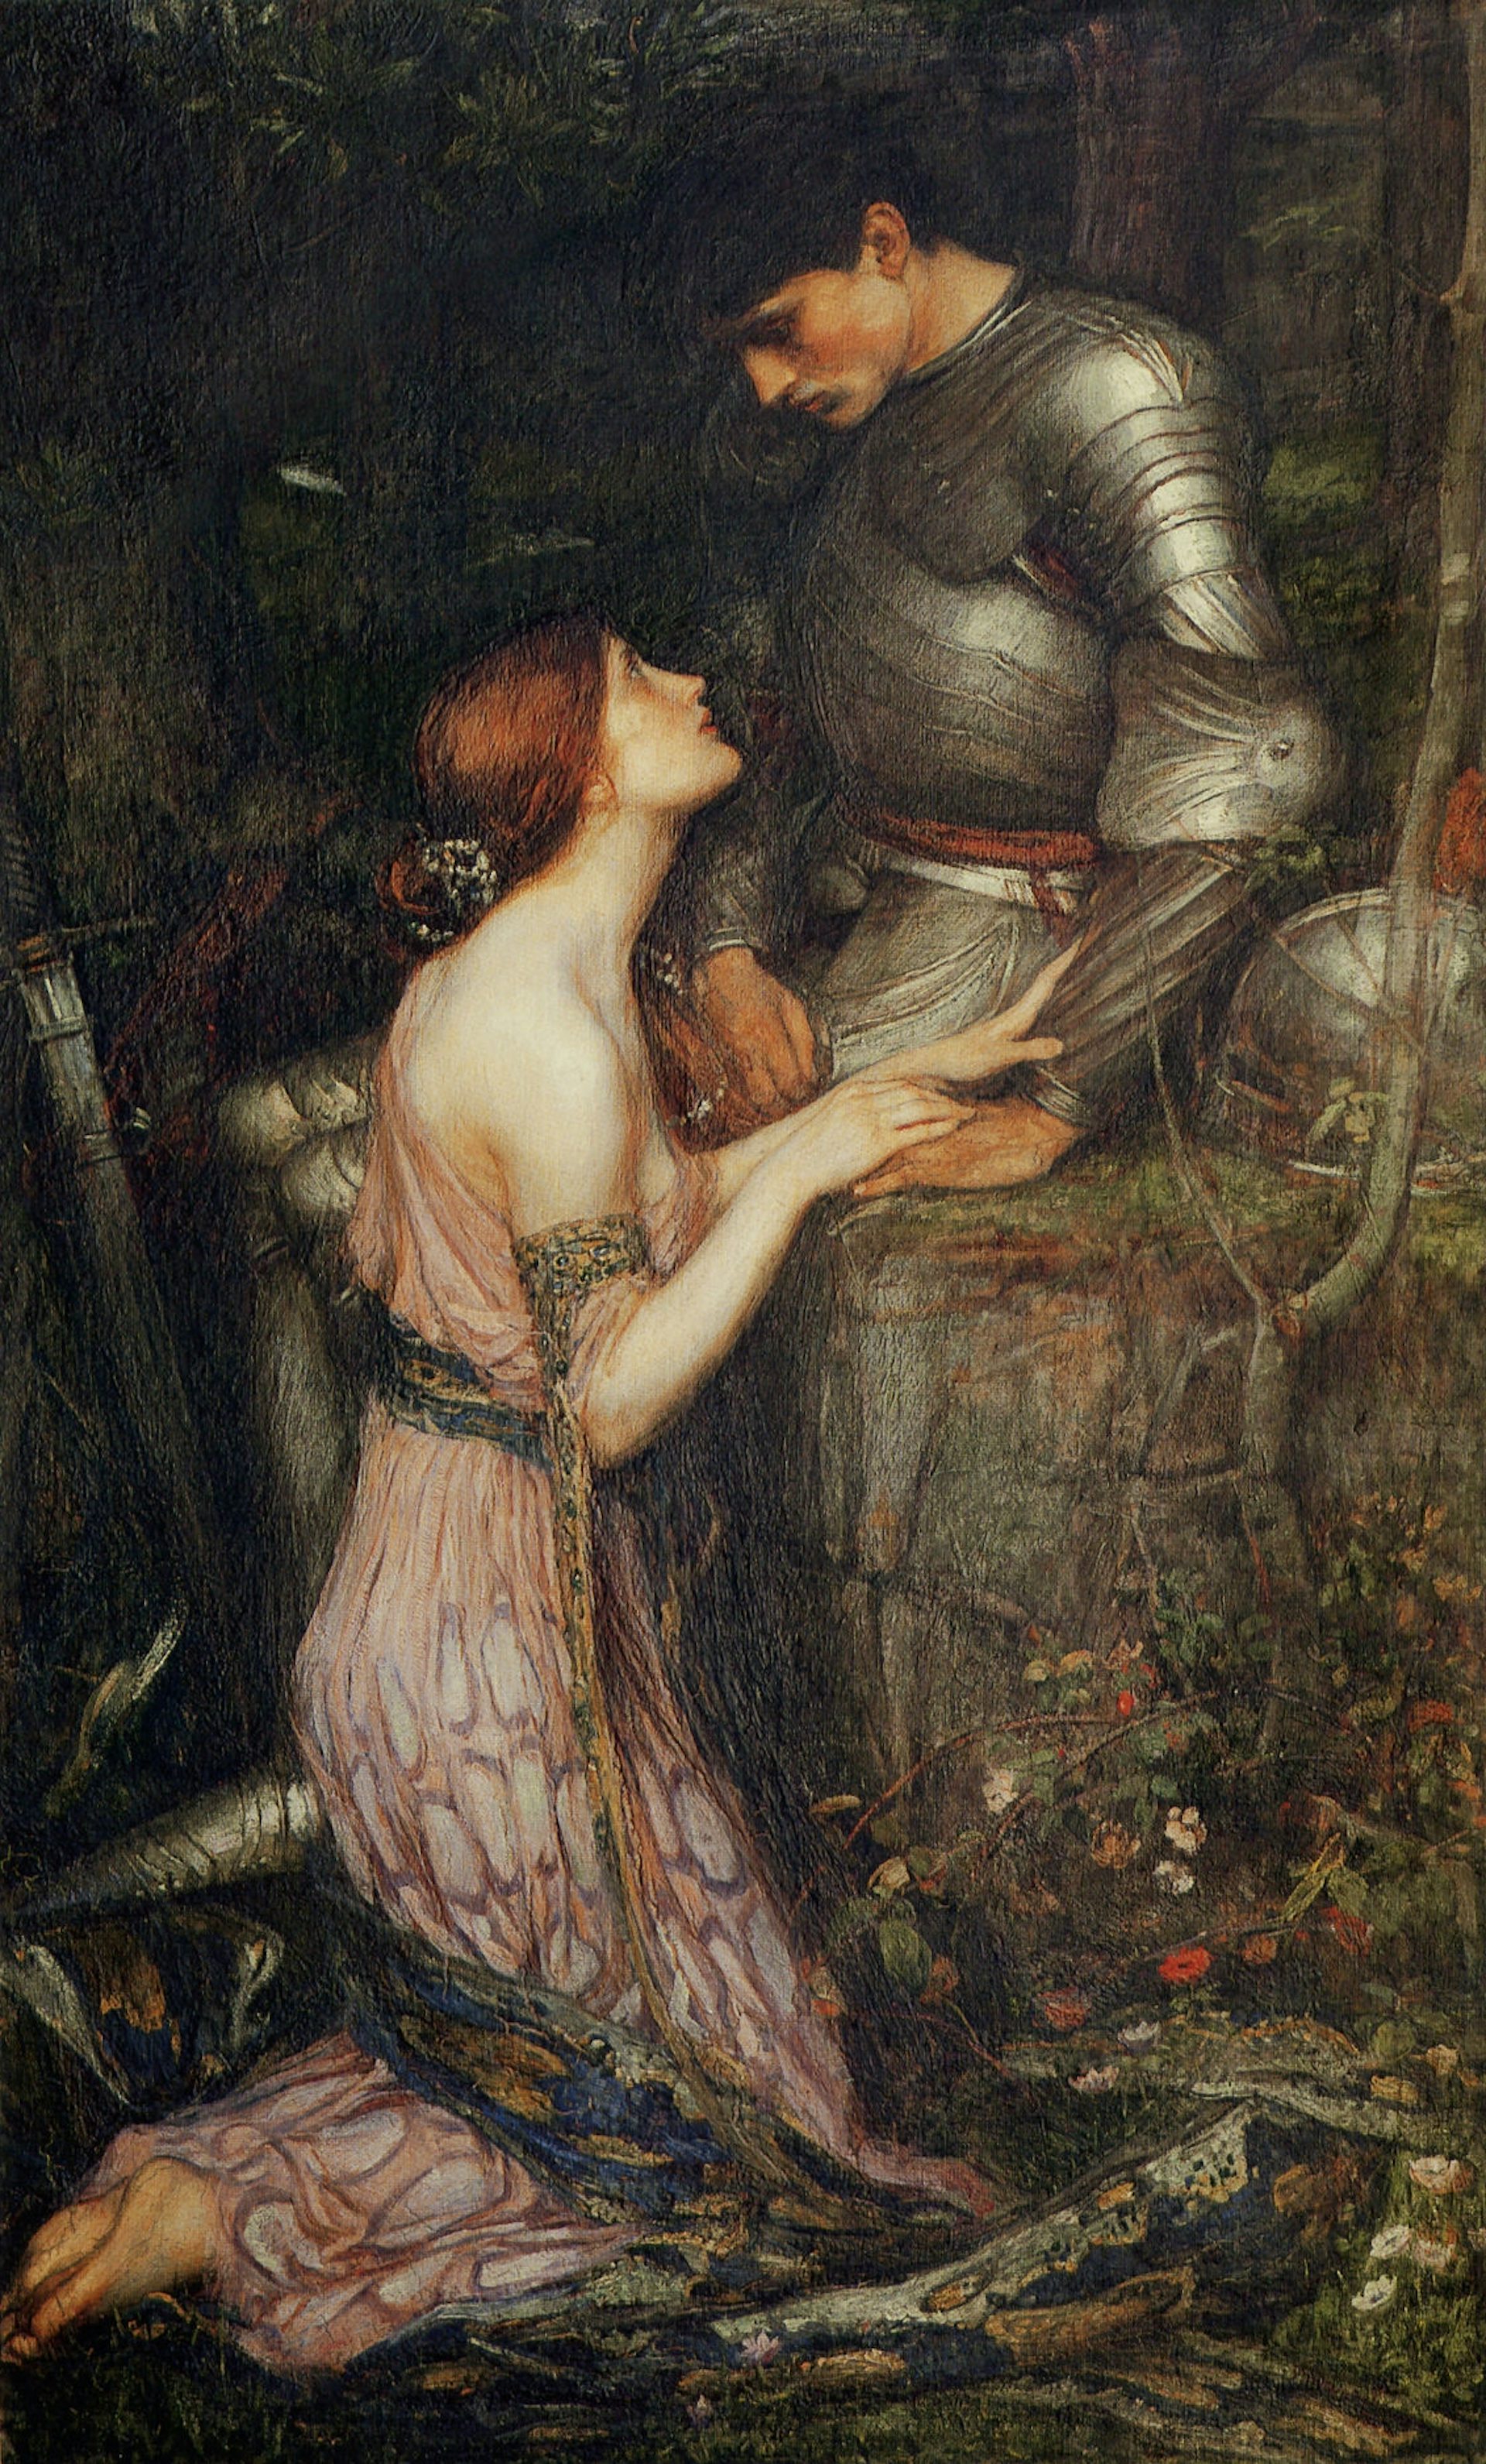 Lamia and the Soldier by John William Waterhouse,1905